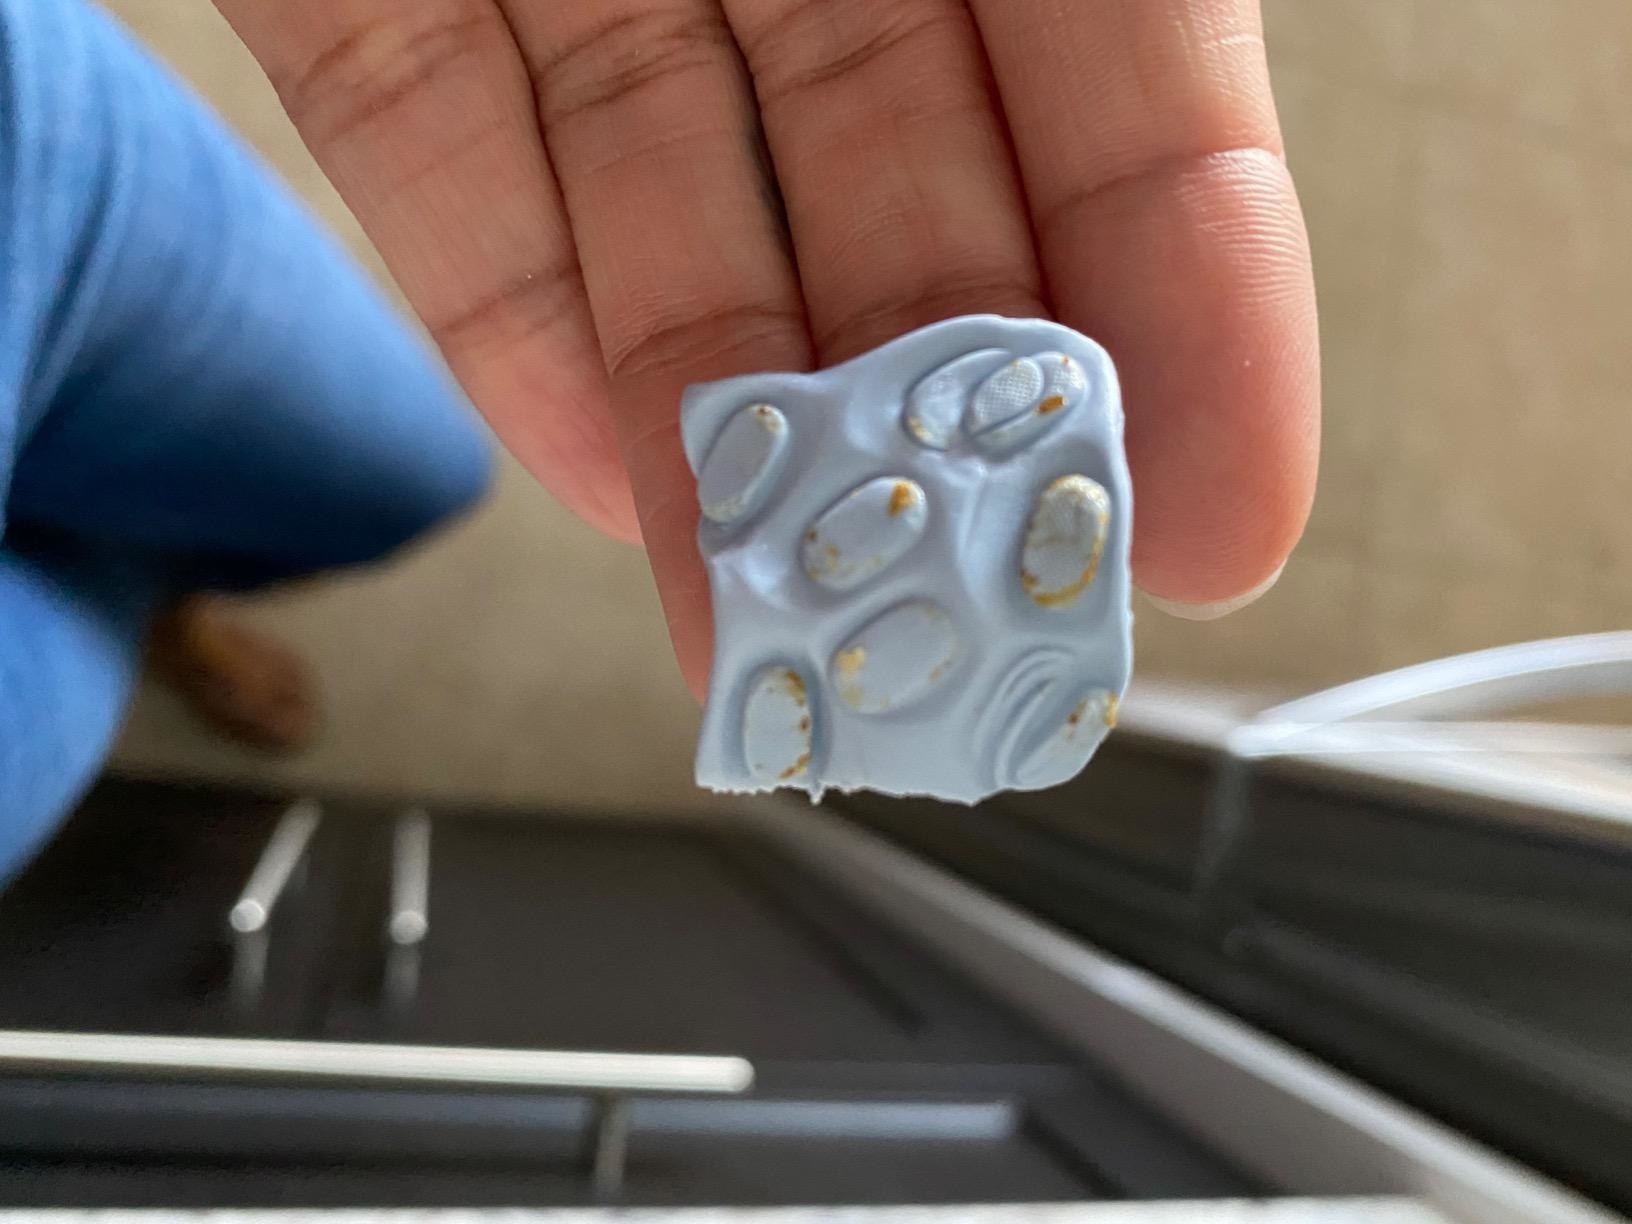 reviewer image of the AirSquares cleaning putty covered in ear wax from AirPods